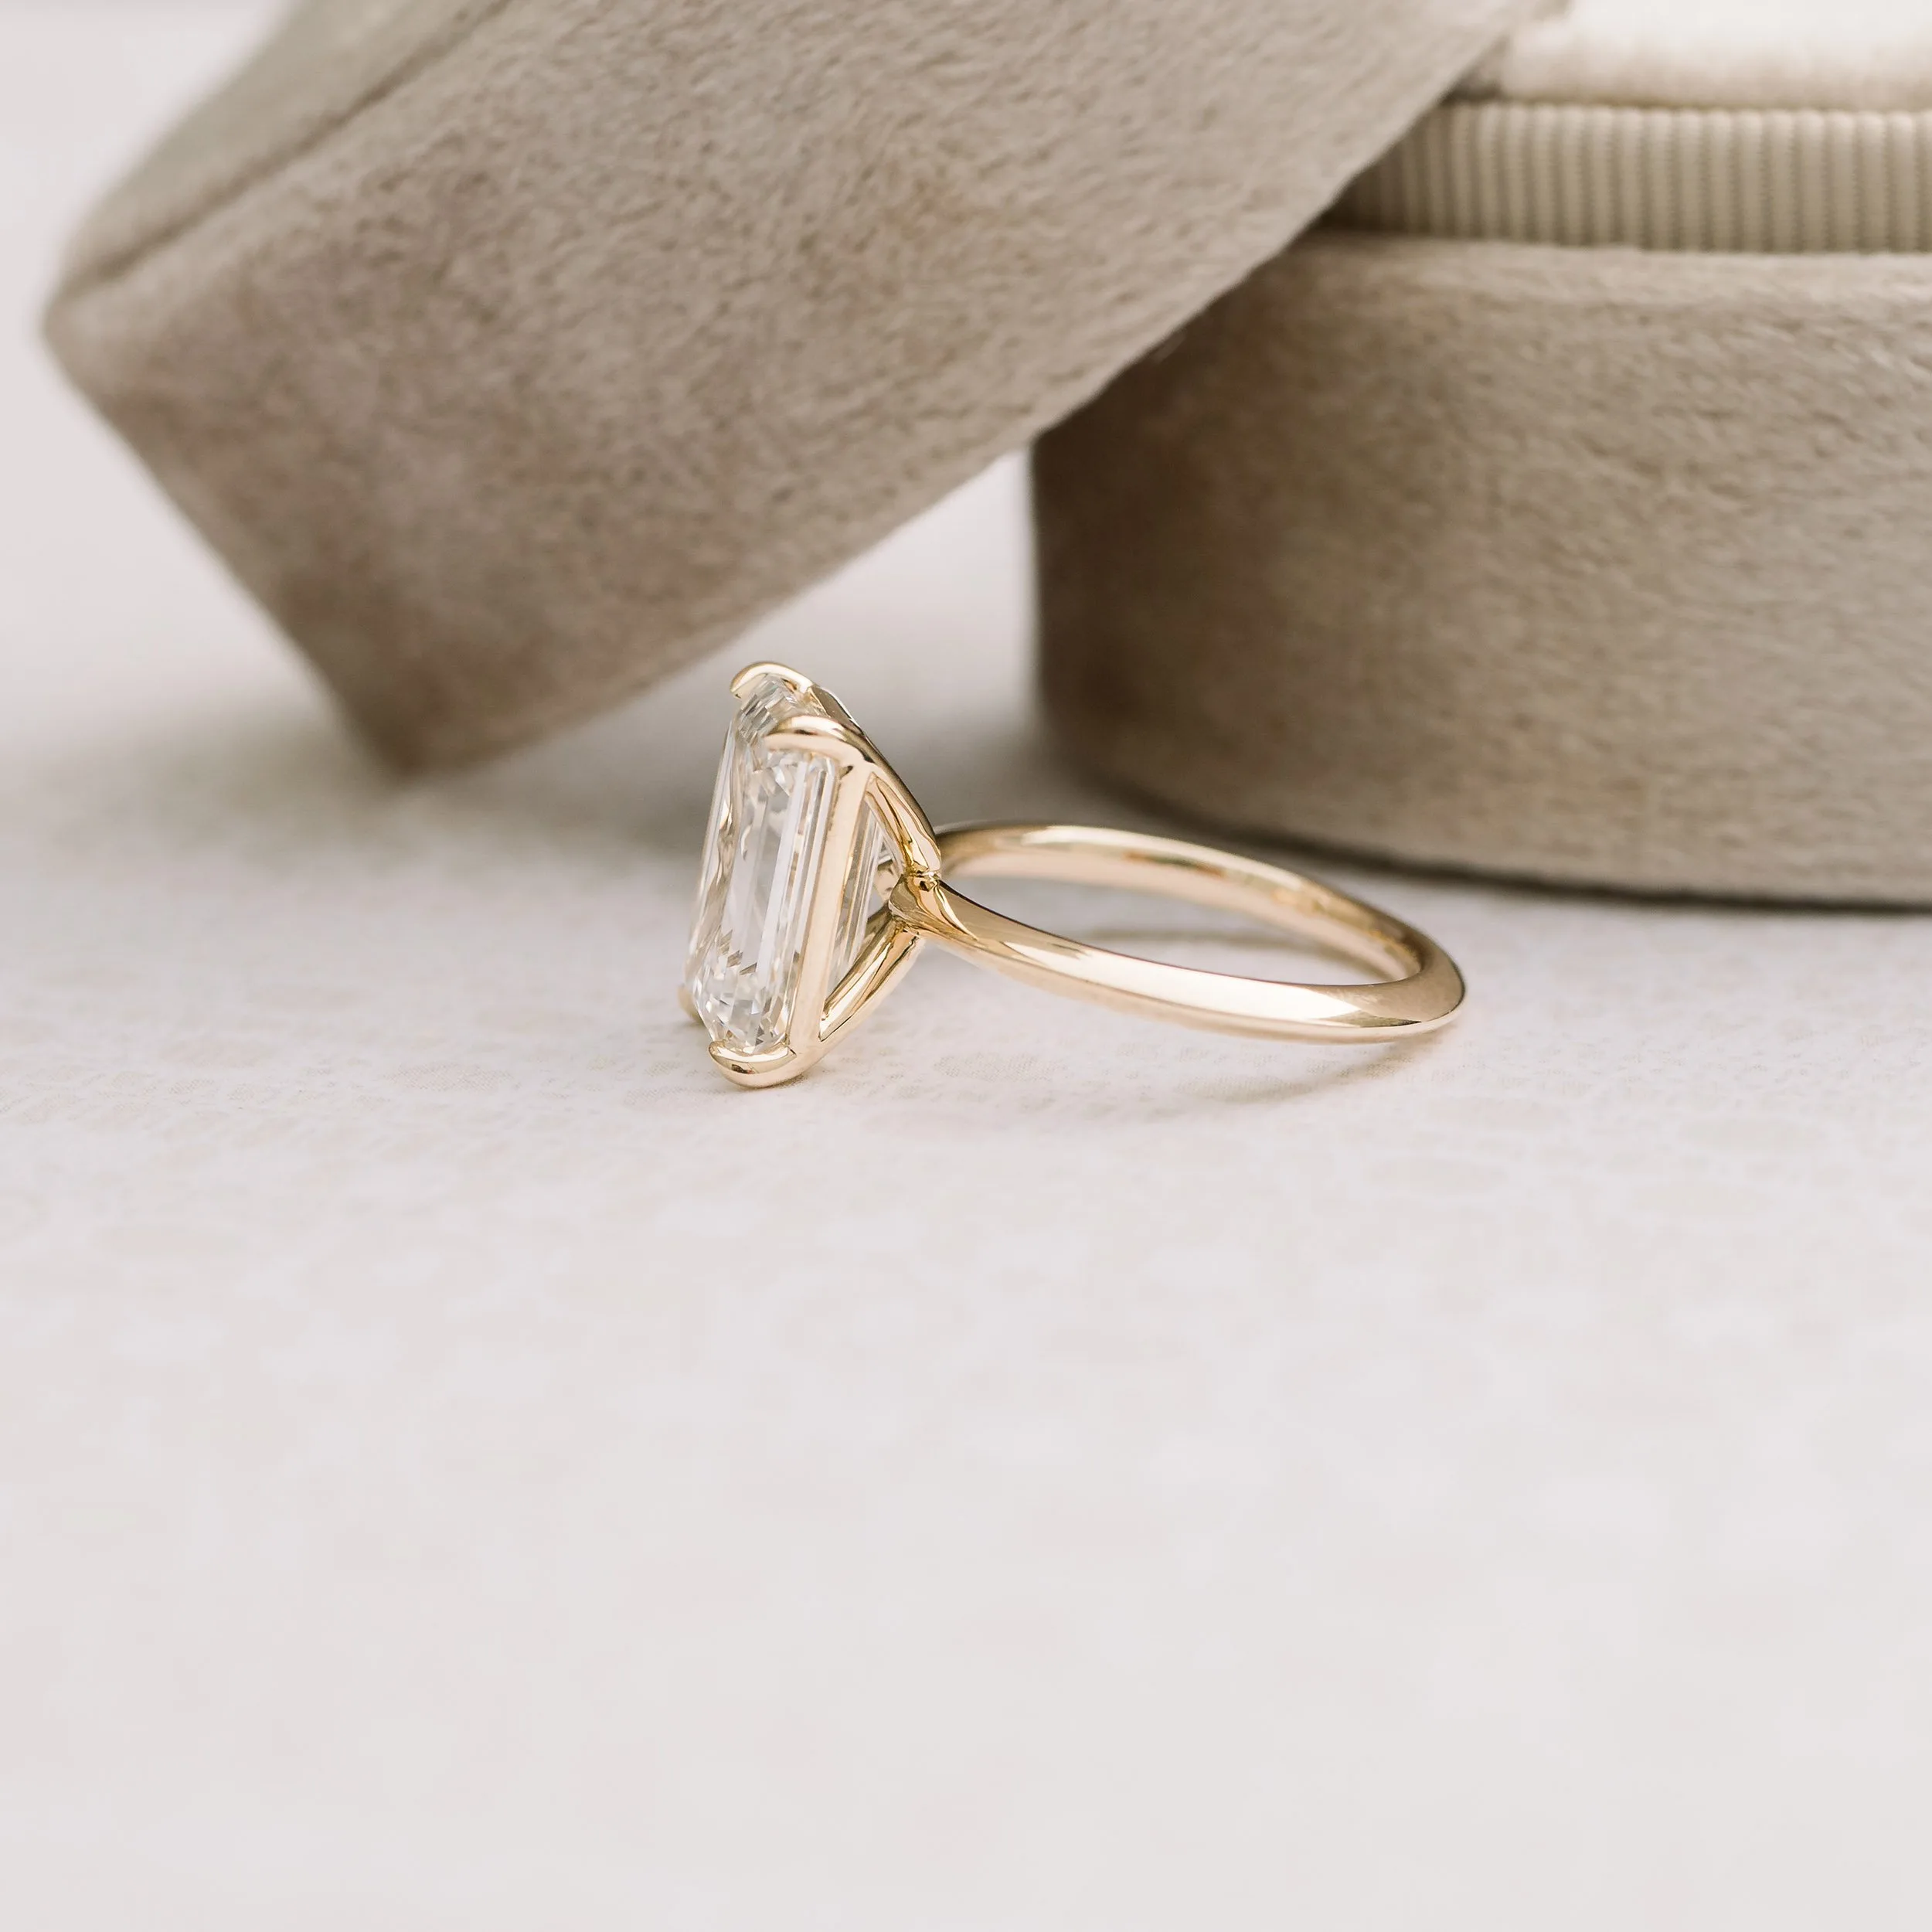 yellow-gold-solitaire-with-emerald-cut_1639956423439-8939J2JHOUB1ZQW2LPOD